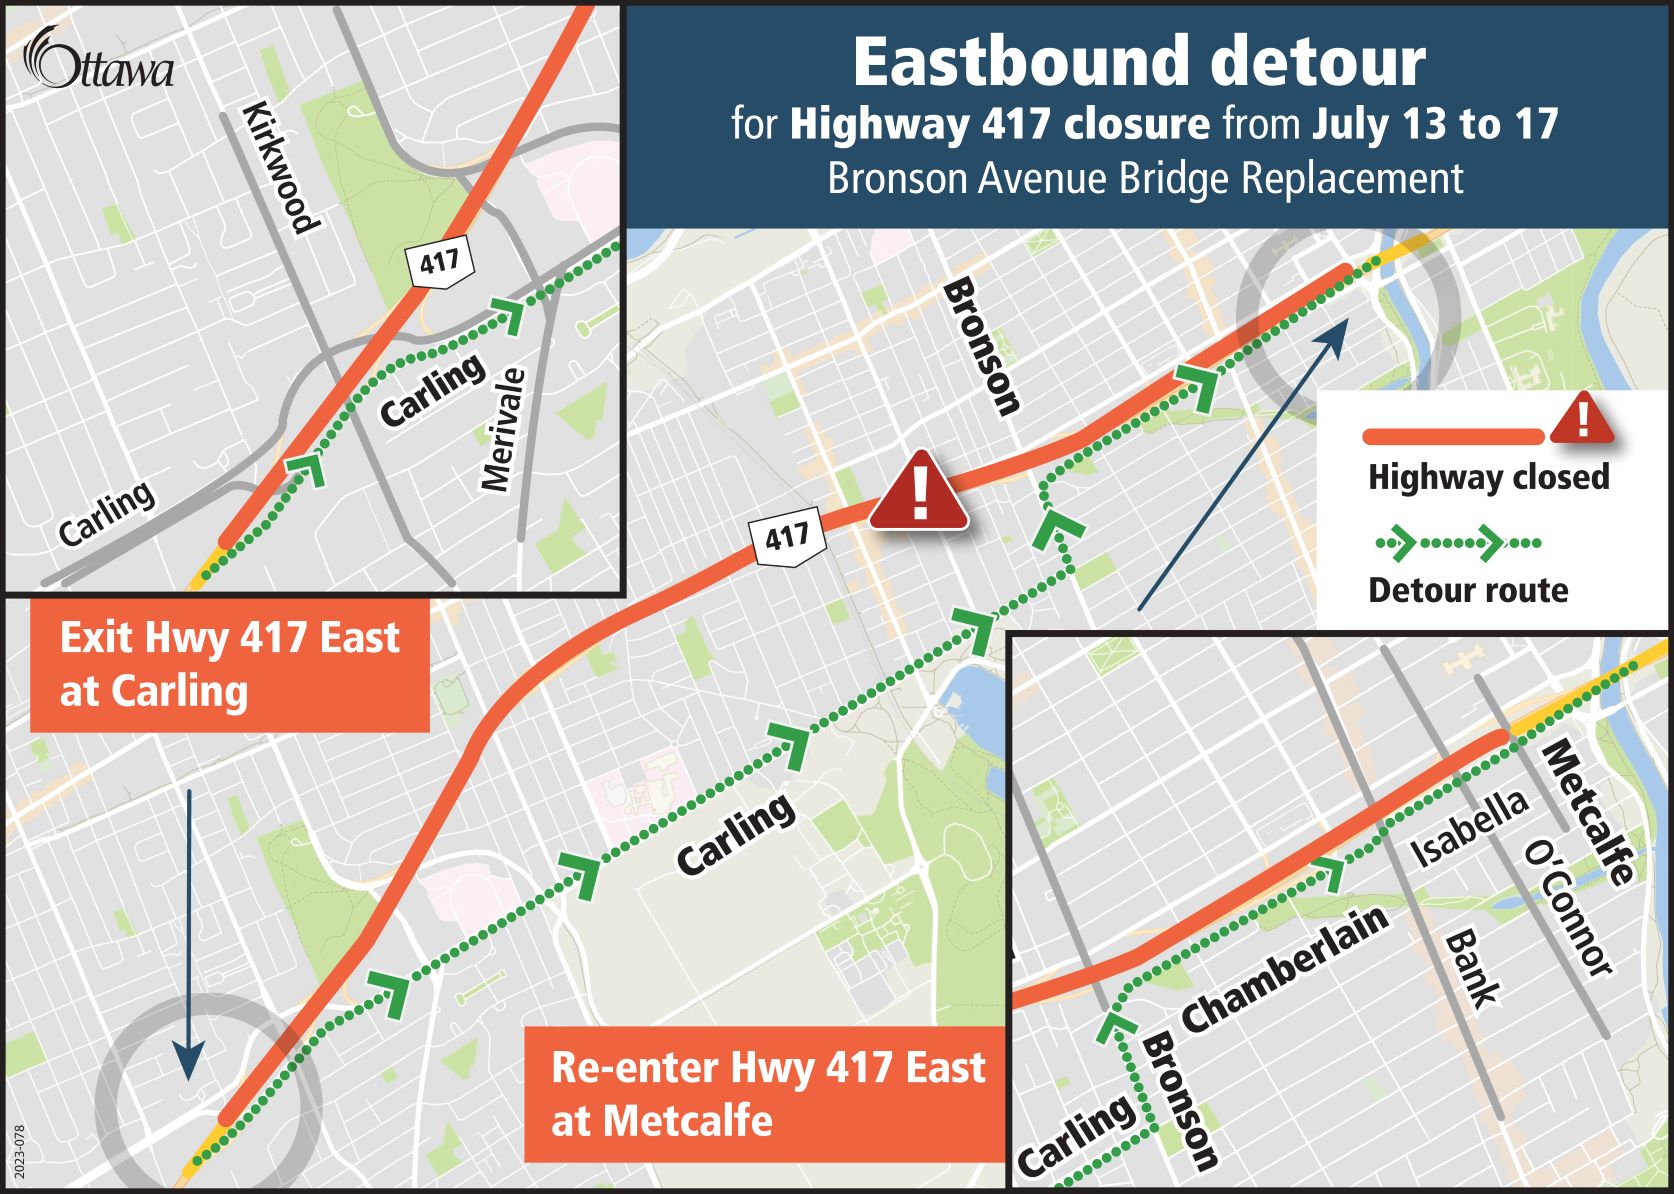 A map providing visual of the Eastbound detour for Highway 417 closure from July 13 to 17 for the Bronson Avenue Bridge Replacement. Visit the link in the post for full details.